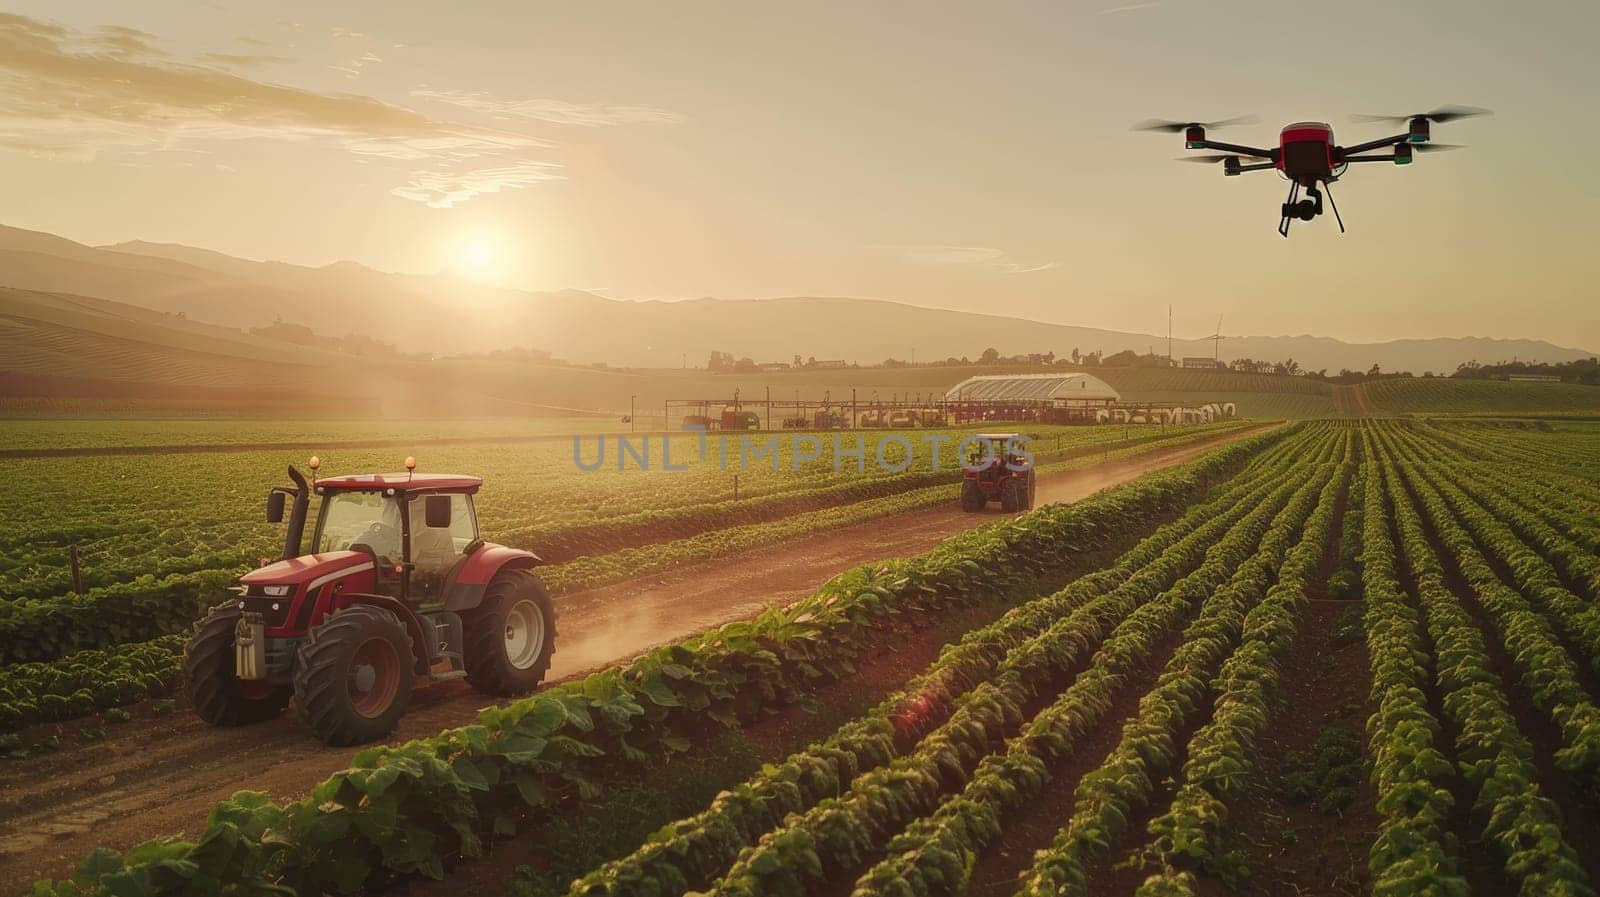 A drone flies over an agricultural field, Smart farming and precision farming concepts, Concept of technological agriculture.